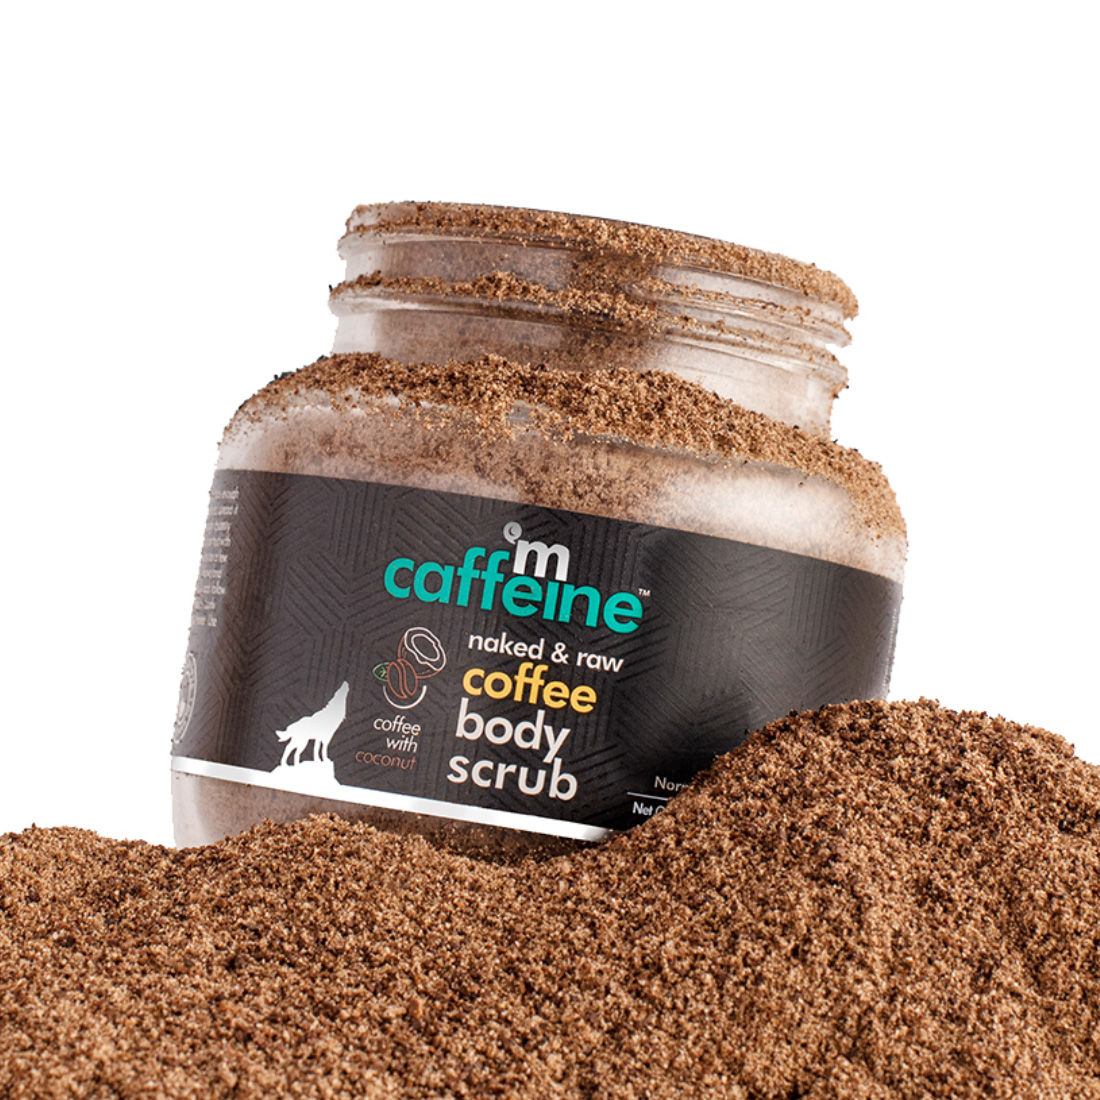 mCaffeine Exfoliating Coffee Body Scrub for Tan Removal & Soft-Smooth Skin | For Women & Men | Tan & Dirt Removing Bathing Scrub for Neck, Arms, Knees and Elbows - 100% Natural & Vegan (55 g)